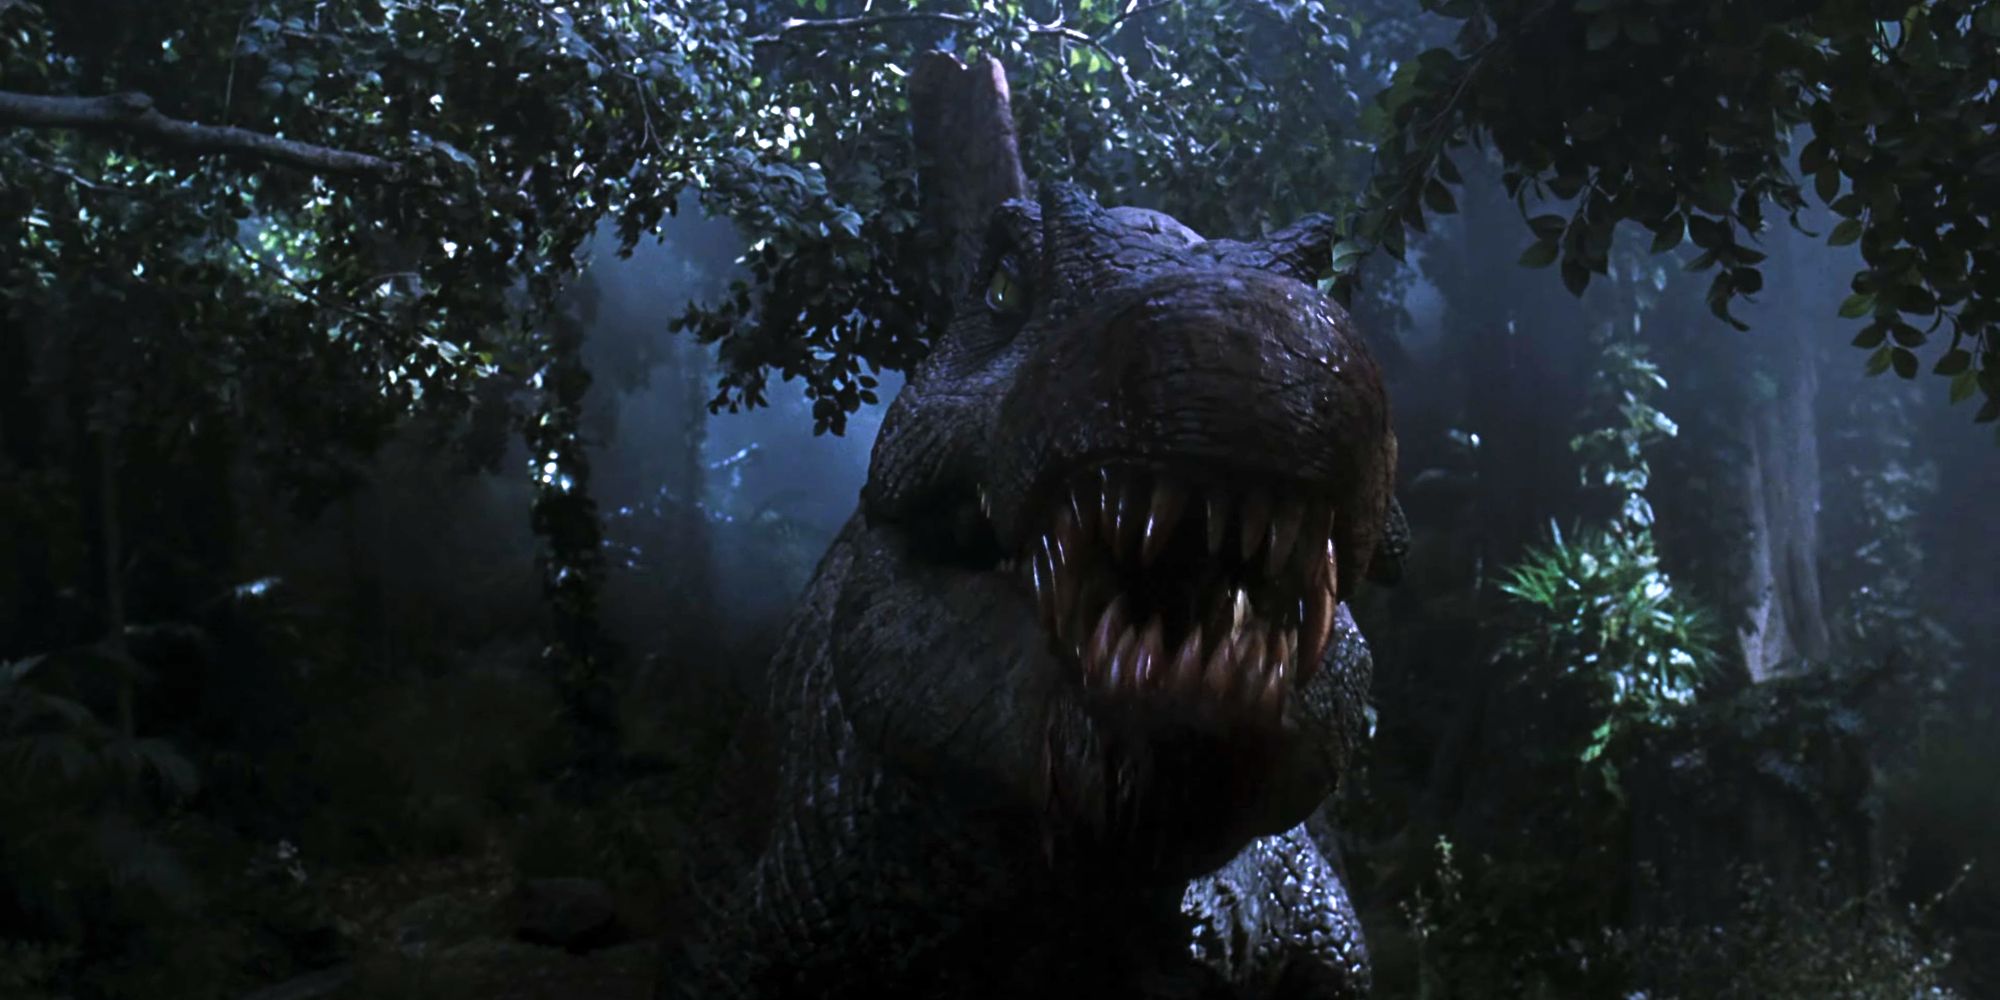 First appearance of the Spinosaurus in Jurassic Park III